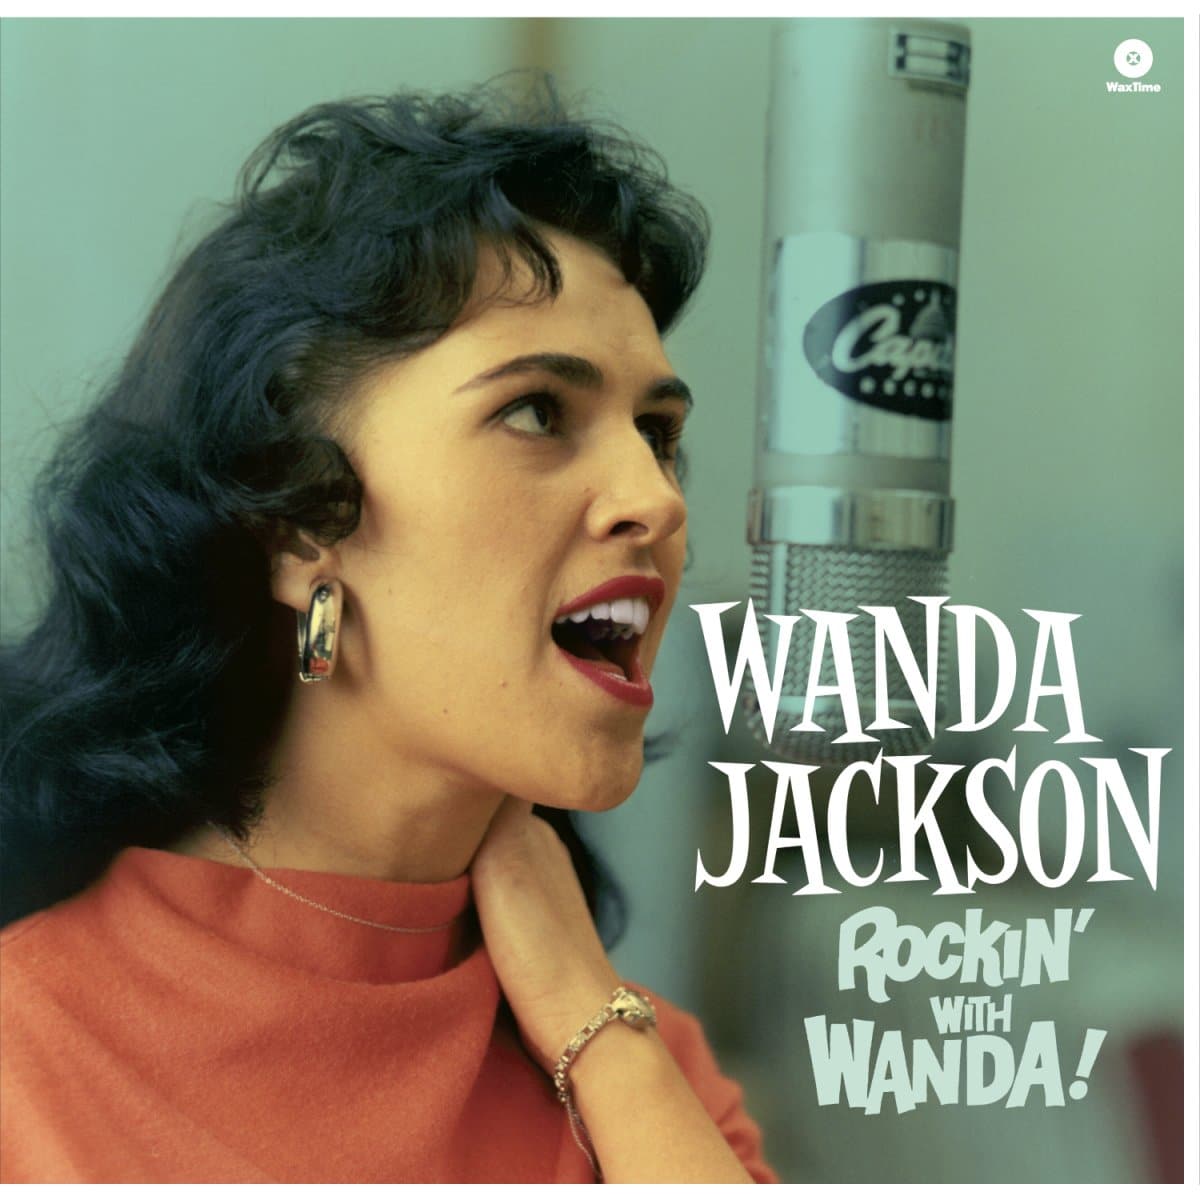 Wanda Jackson, “Let’s Have A Party”